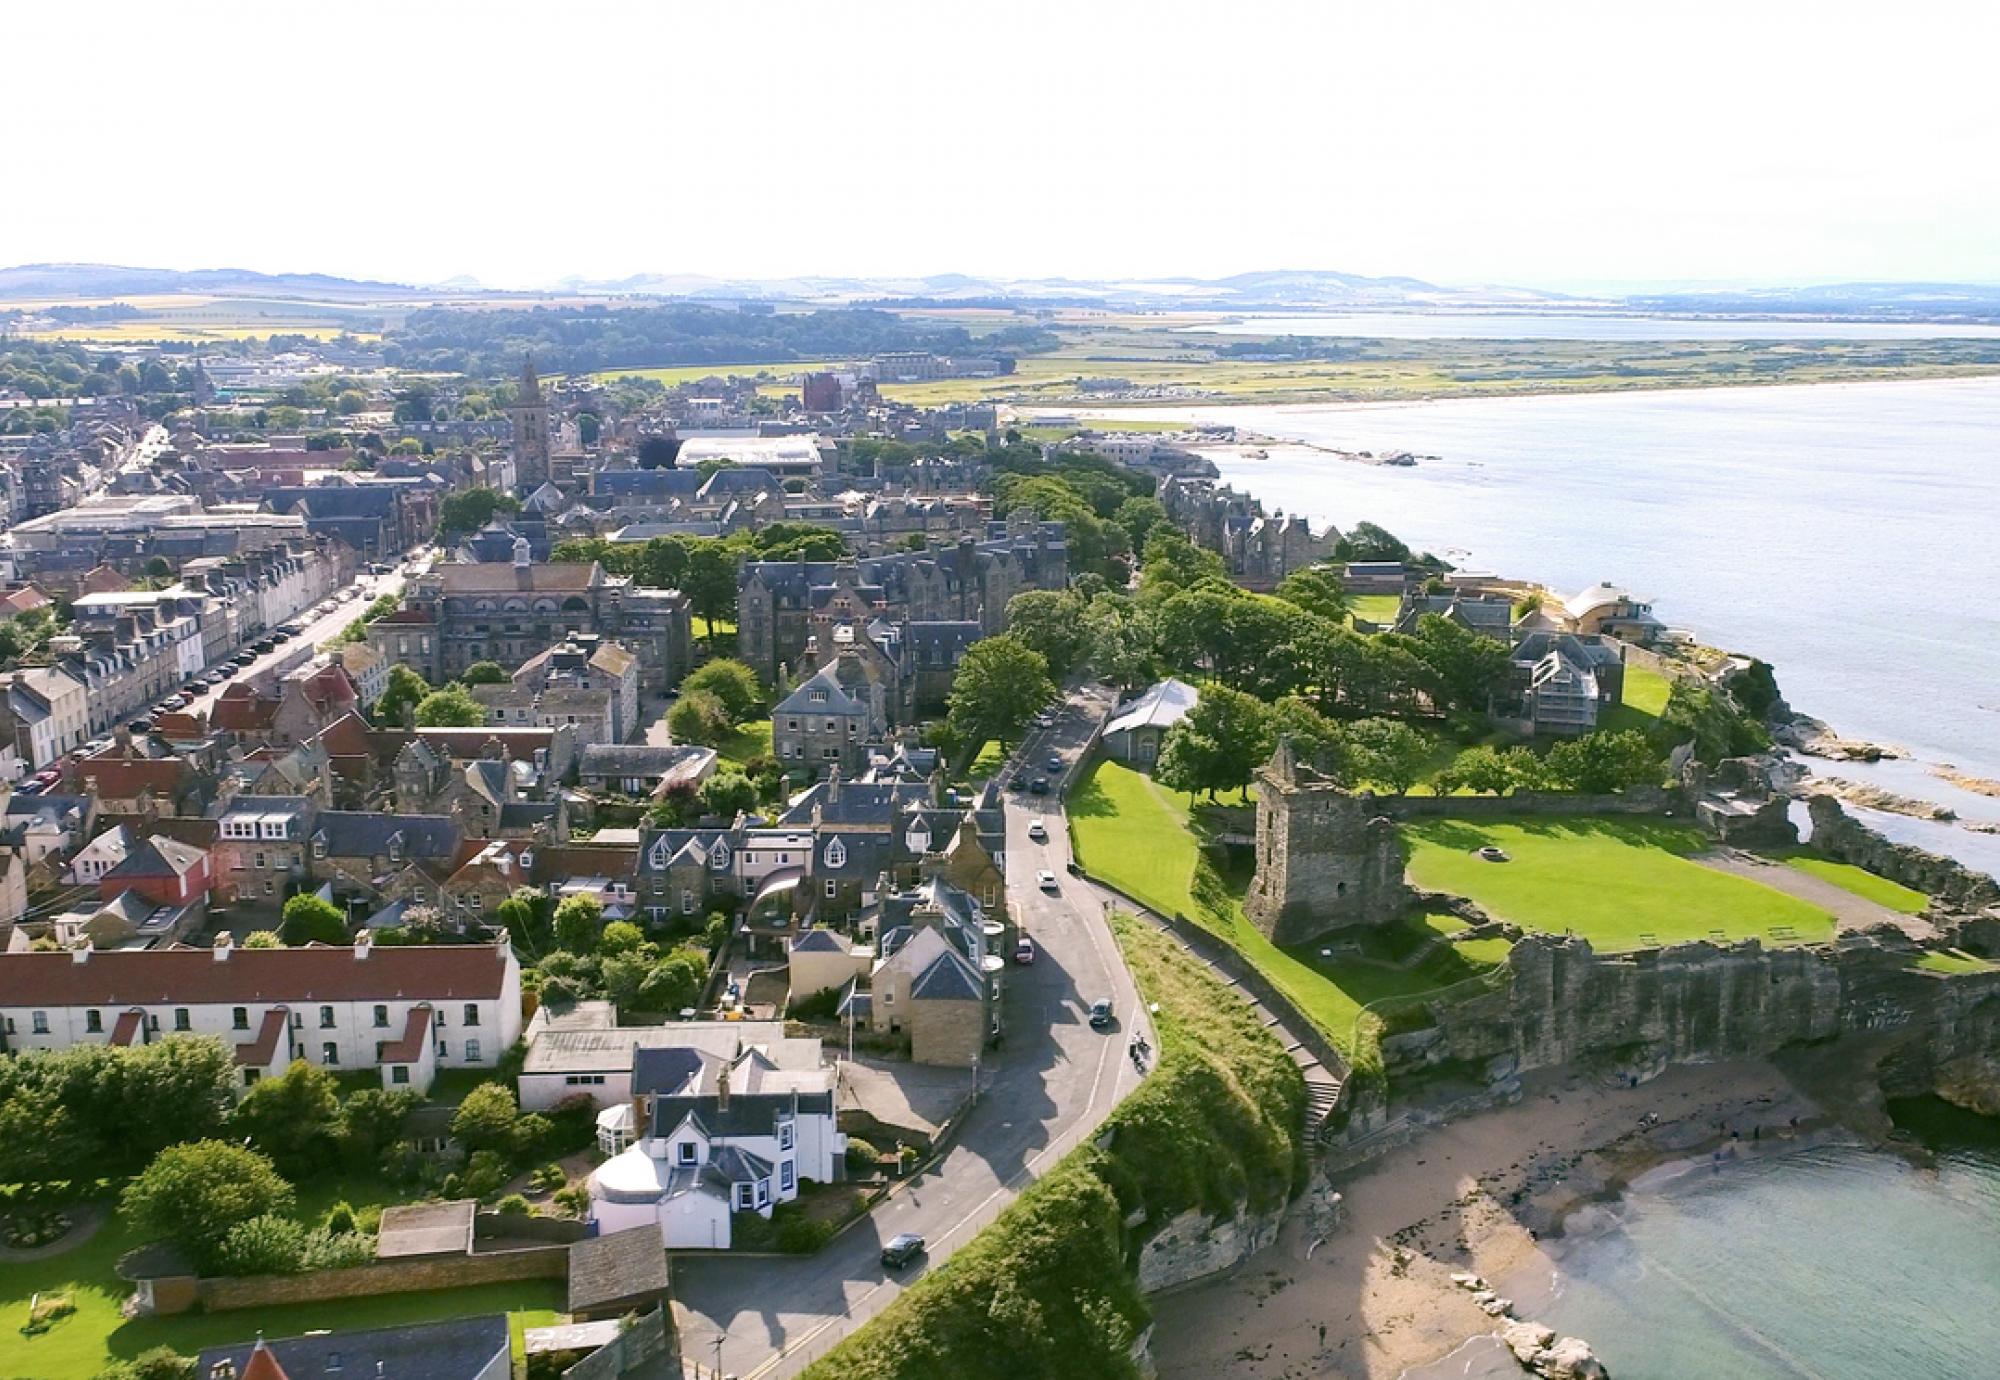 Aerial view of St. Andrews Fife Scotland